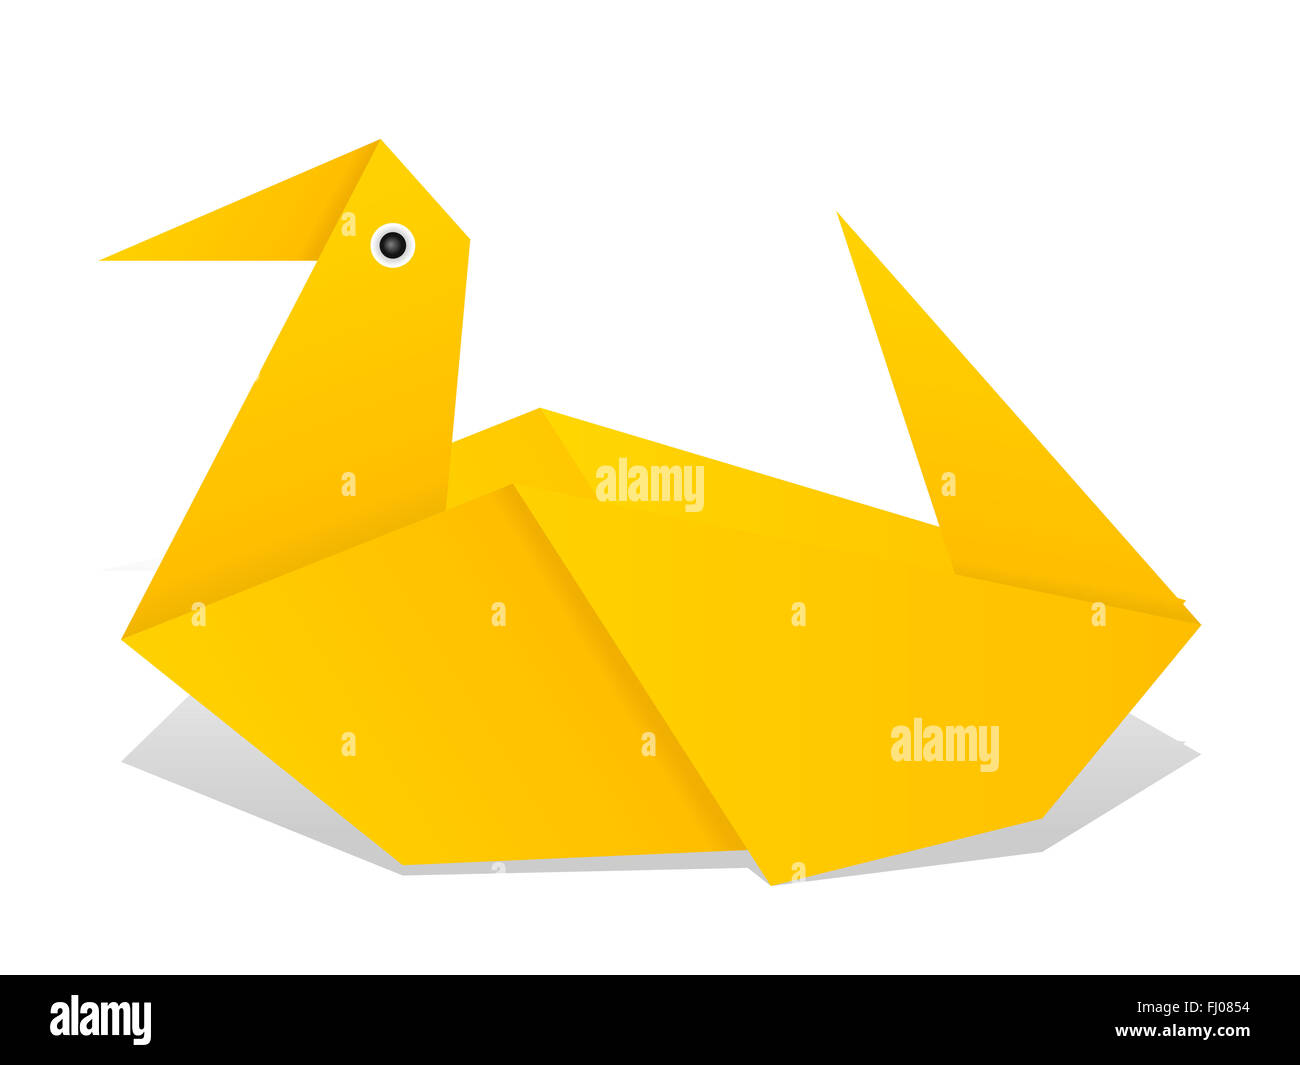 Learn How to Create an Origami Duck